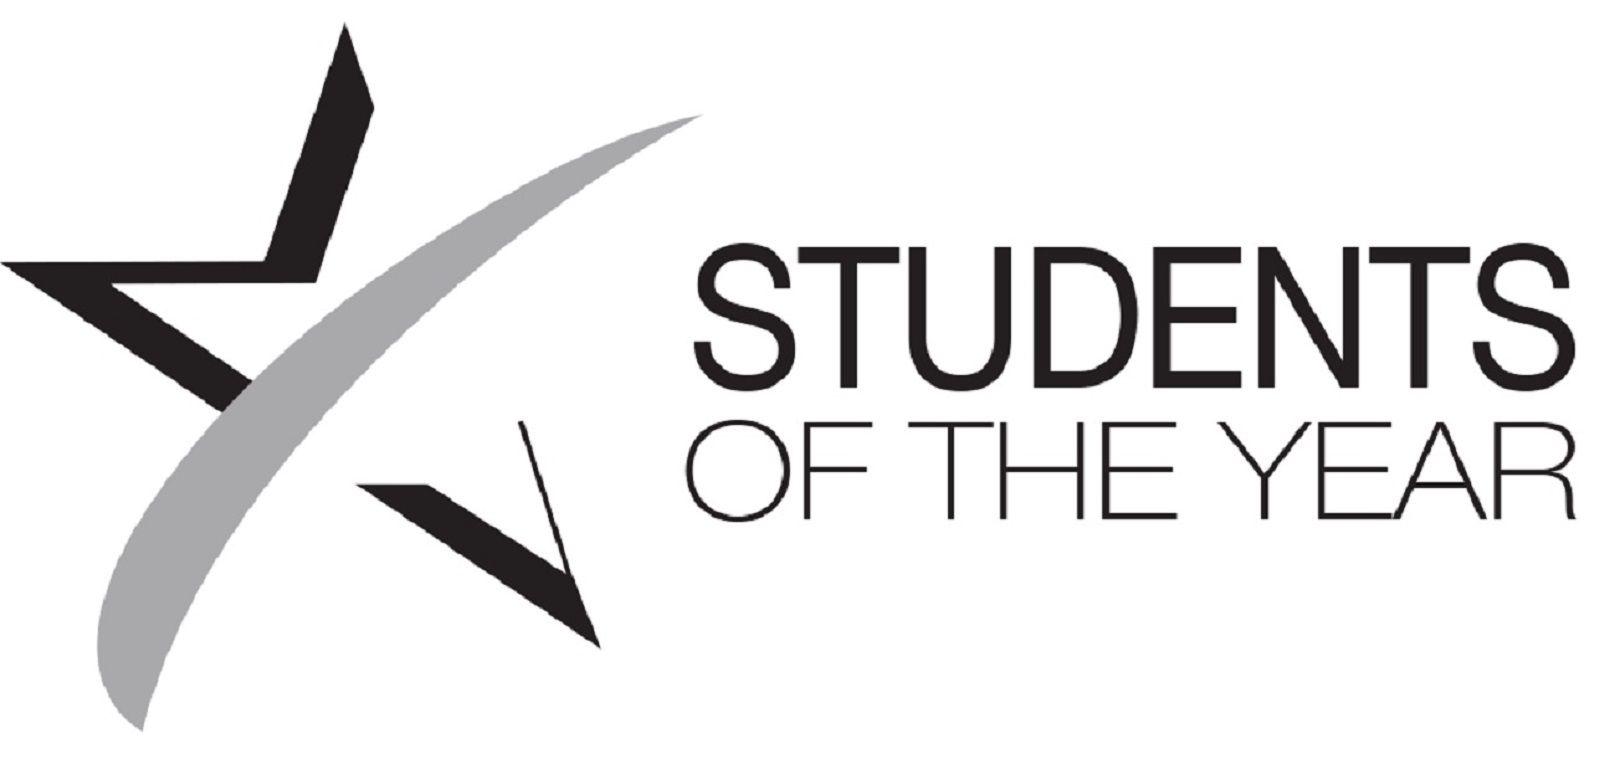 LLS Logo - About Students of The Year